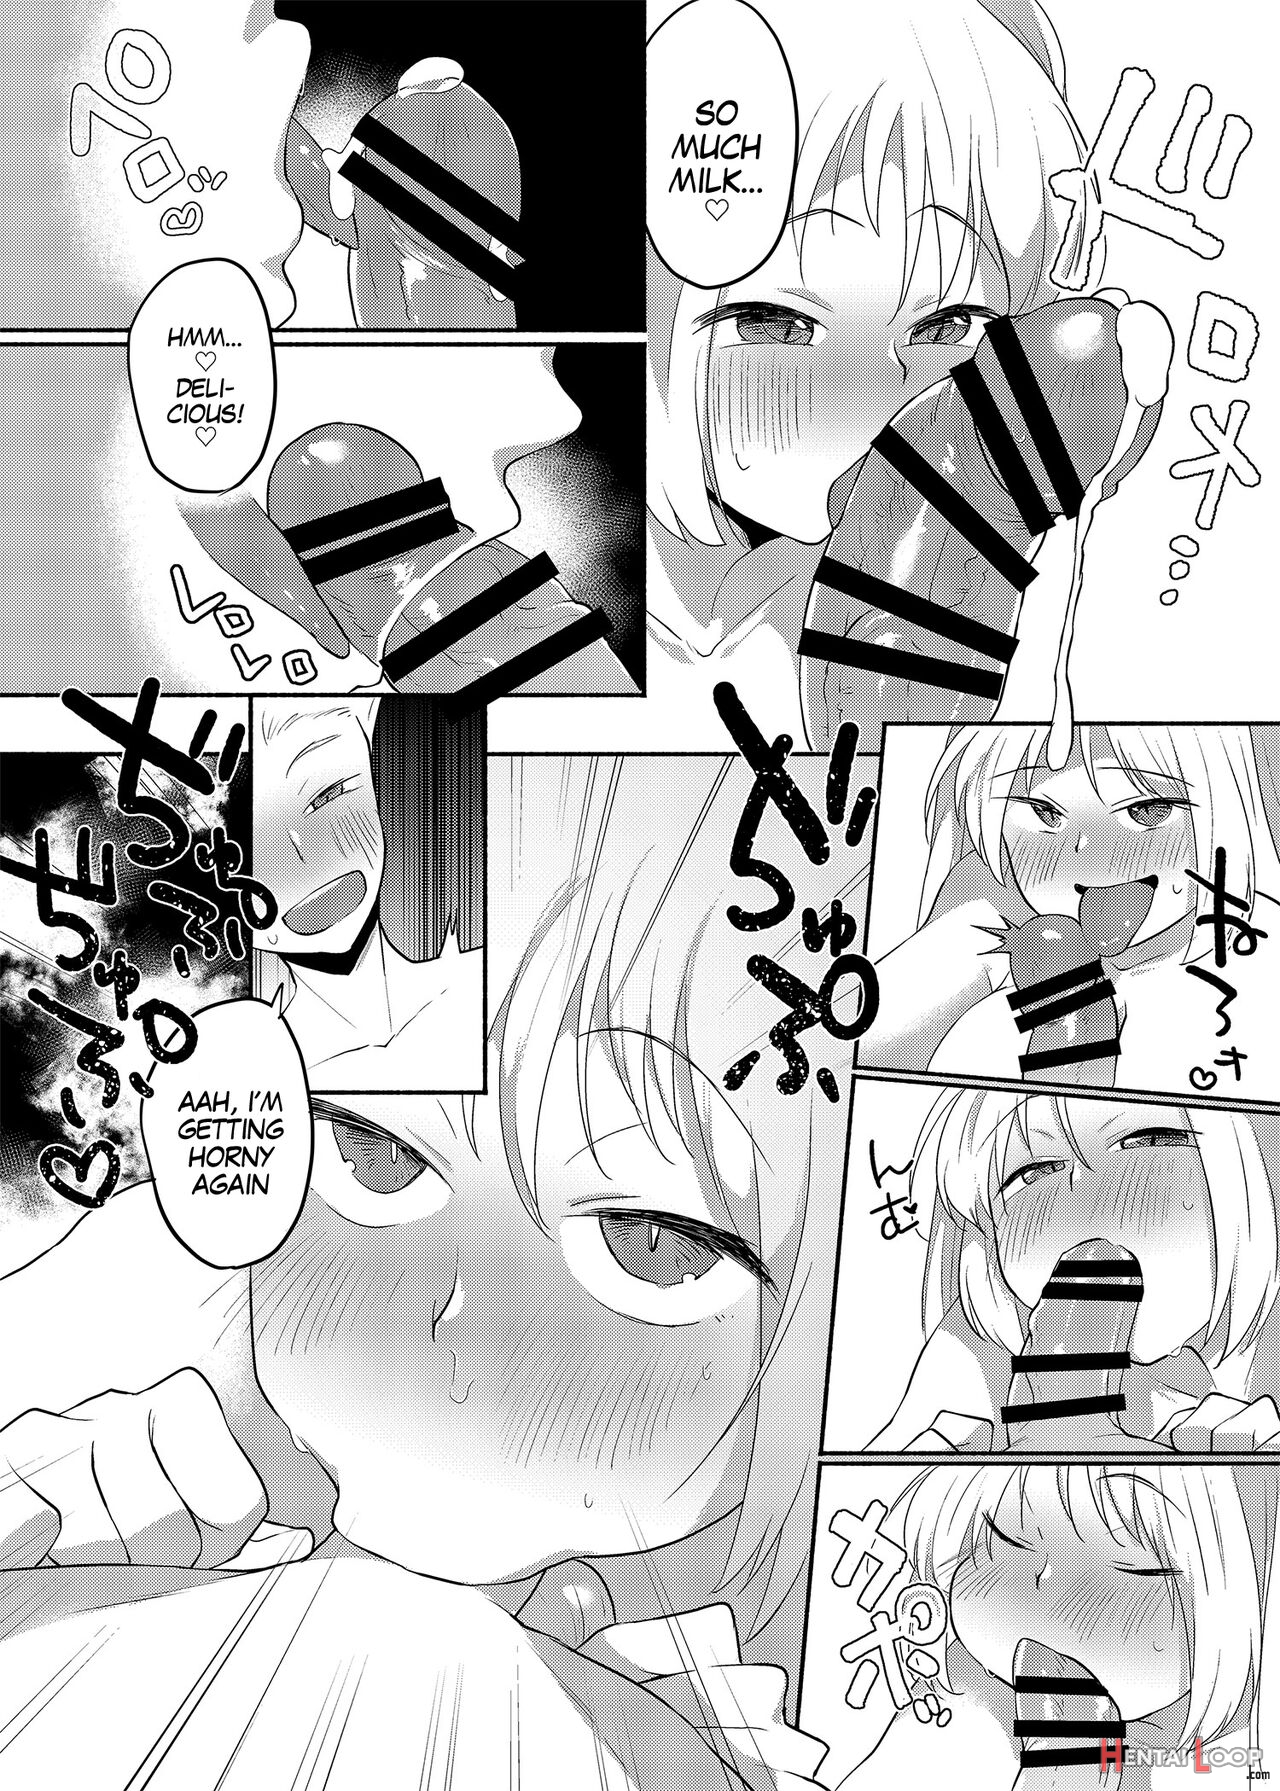 Crossdressing Fetish Gone Out Of Hand Ch 2 page 3